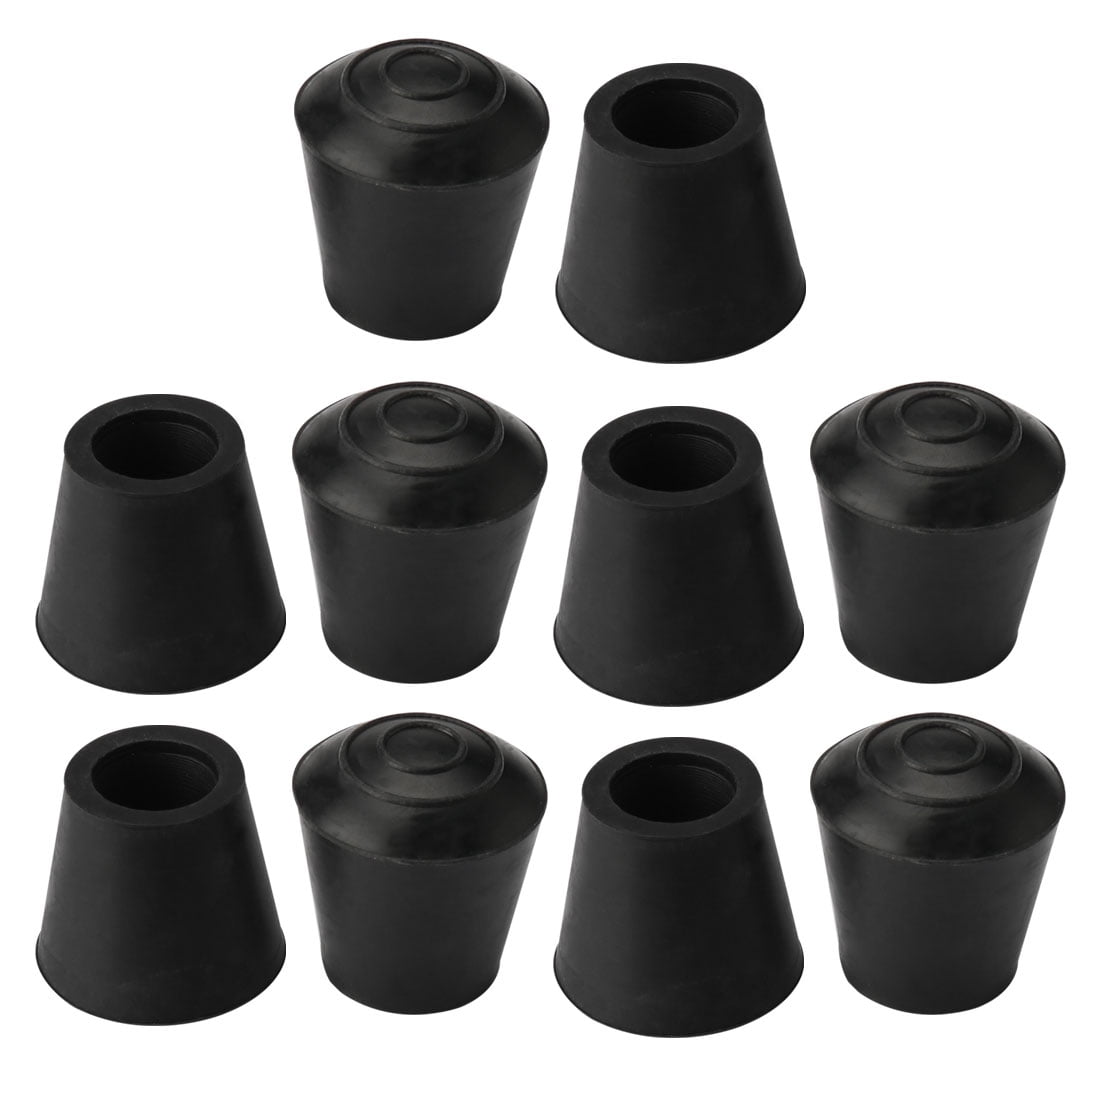 10Pcs Black Rubber Feet Protector Pads Desk Covers for Furniture Cabinet 